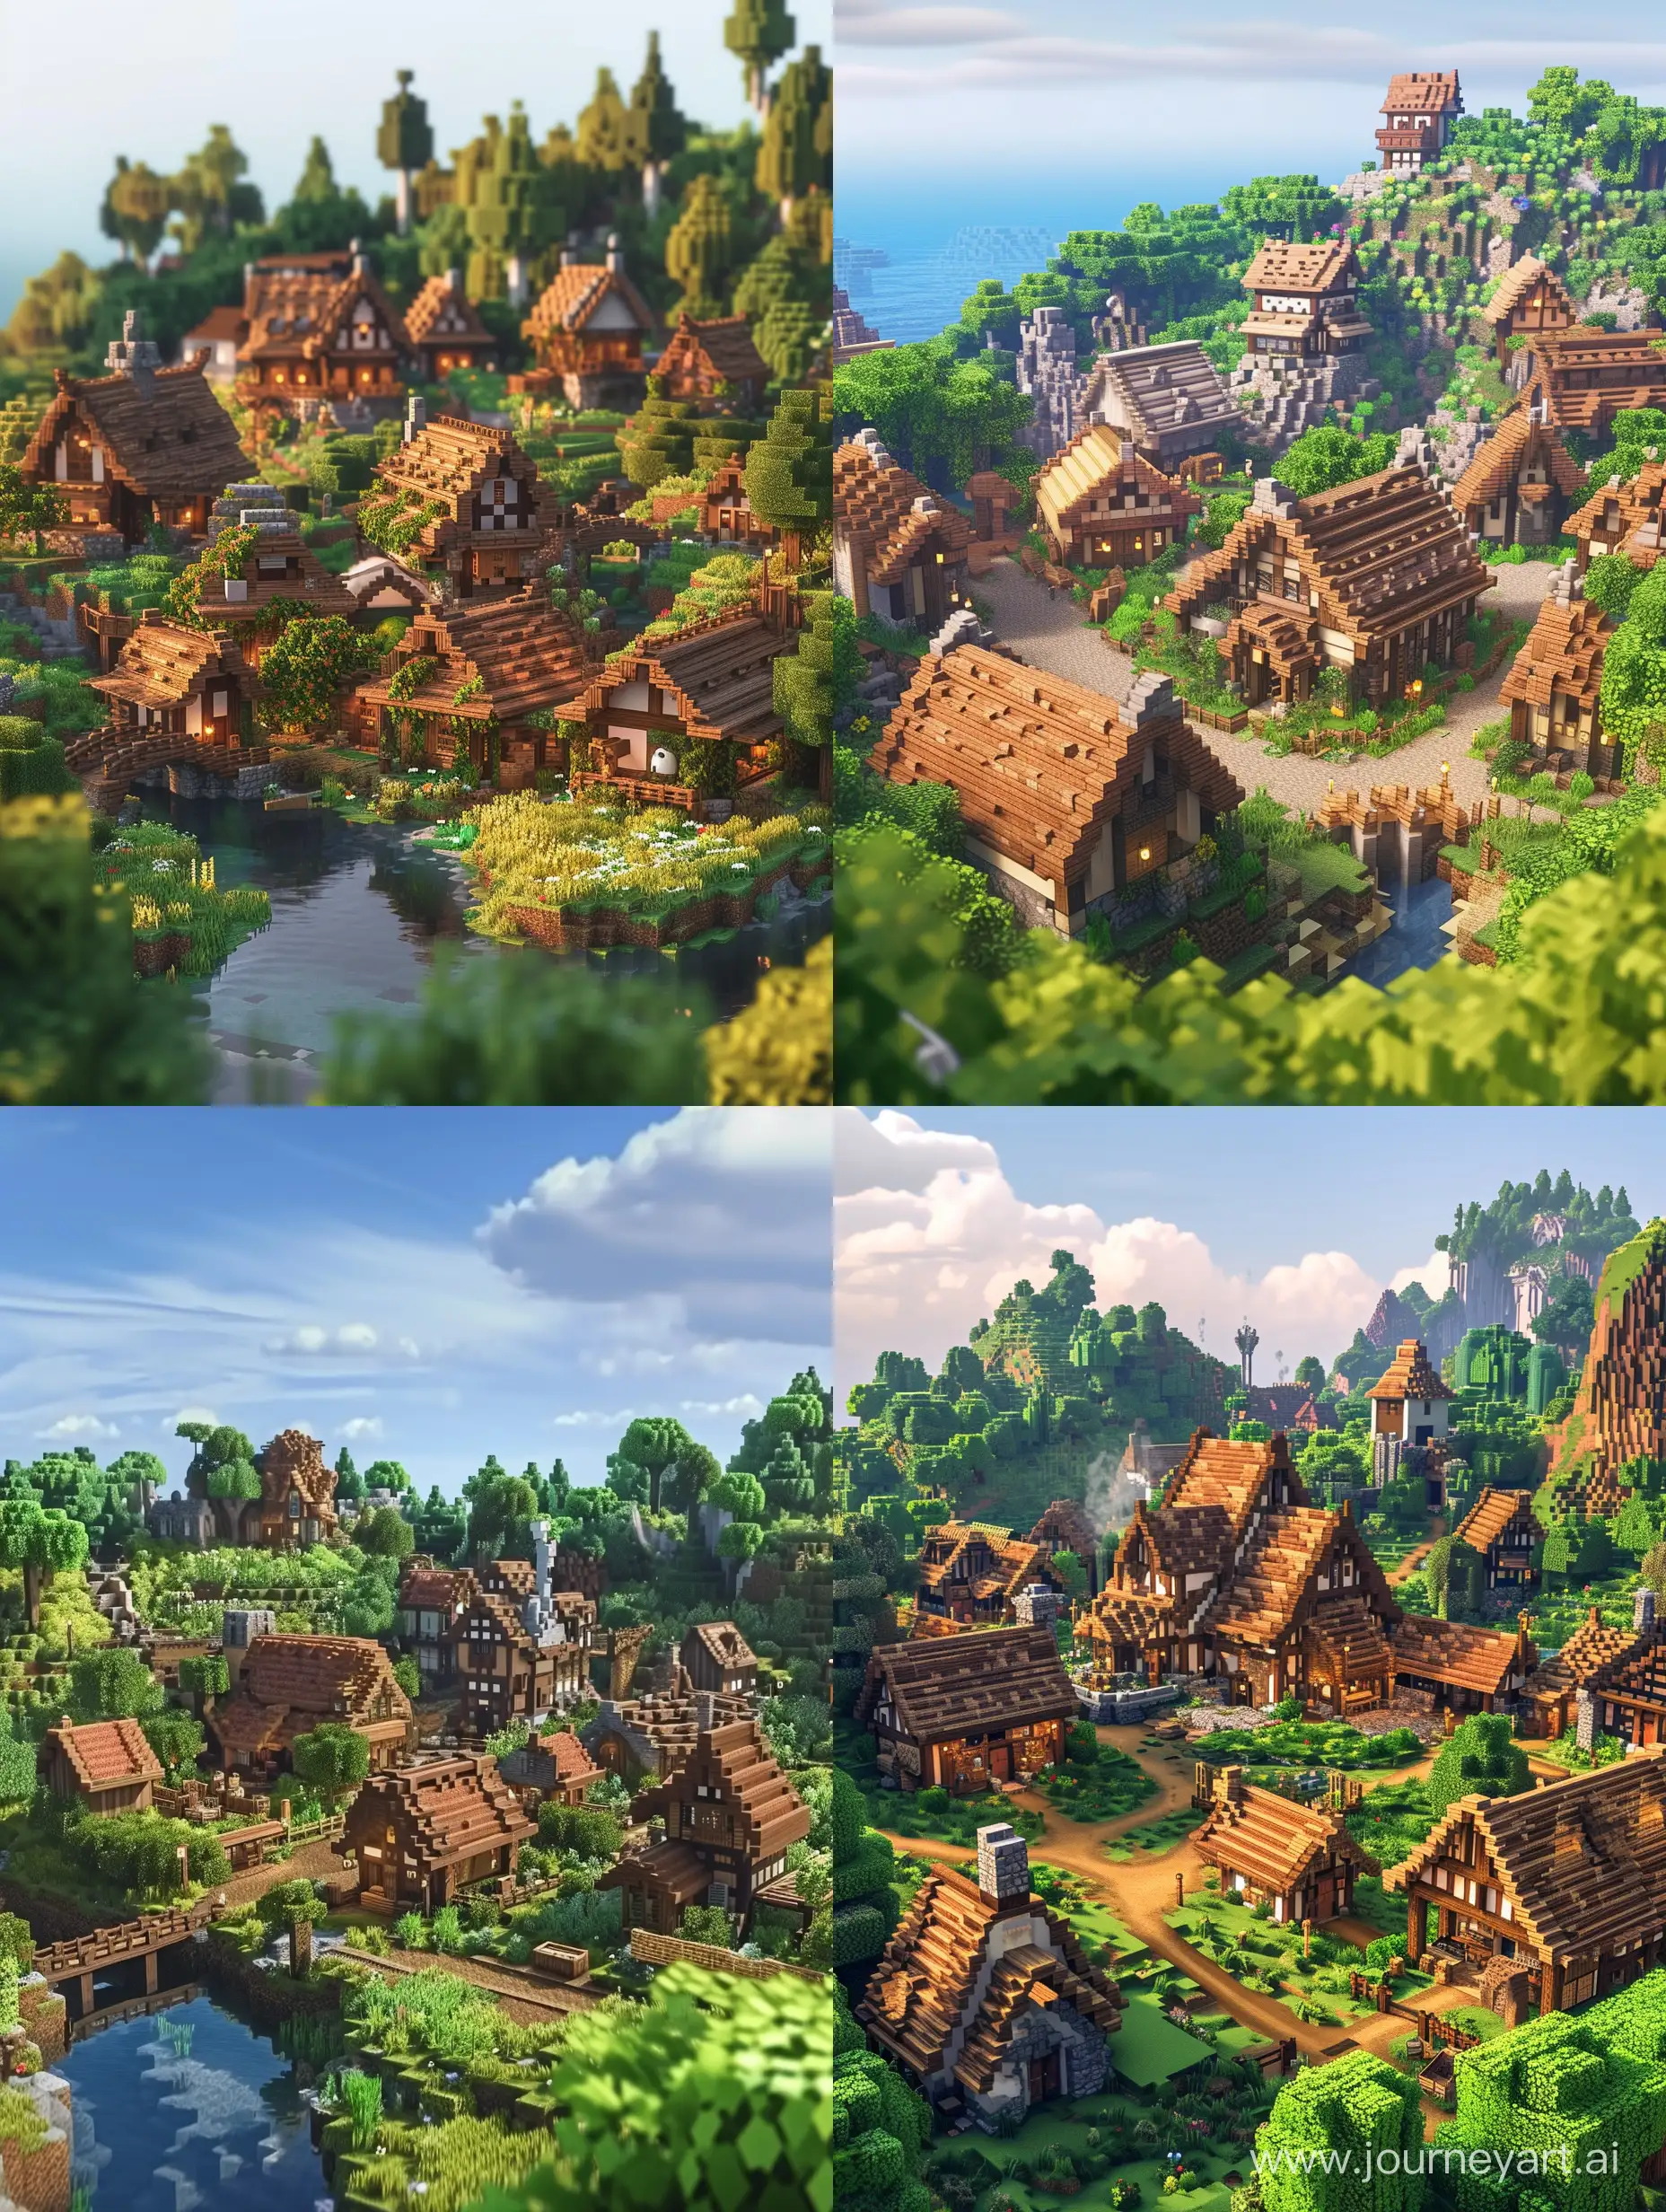 A picture of a village in Minecraft inspired by Studio Ghibli Art Style